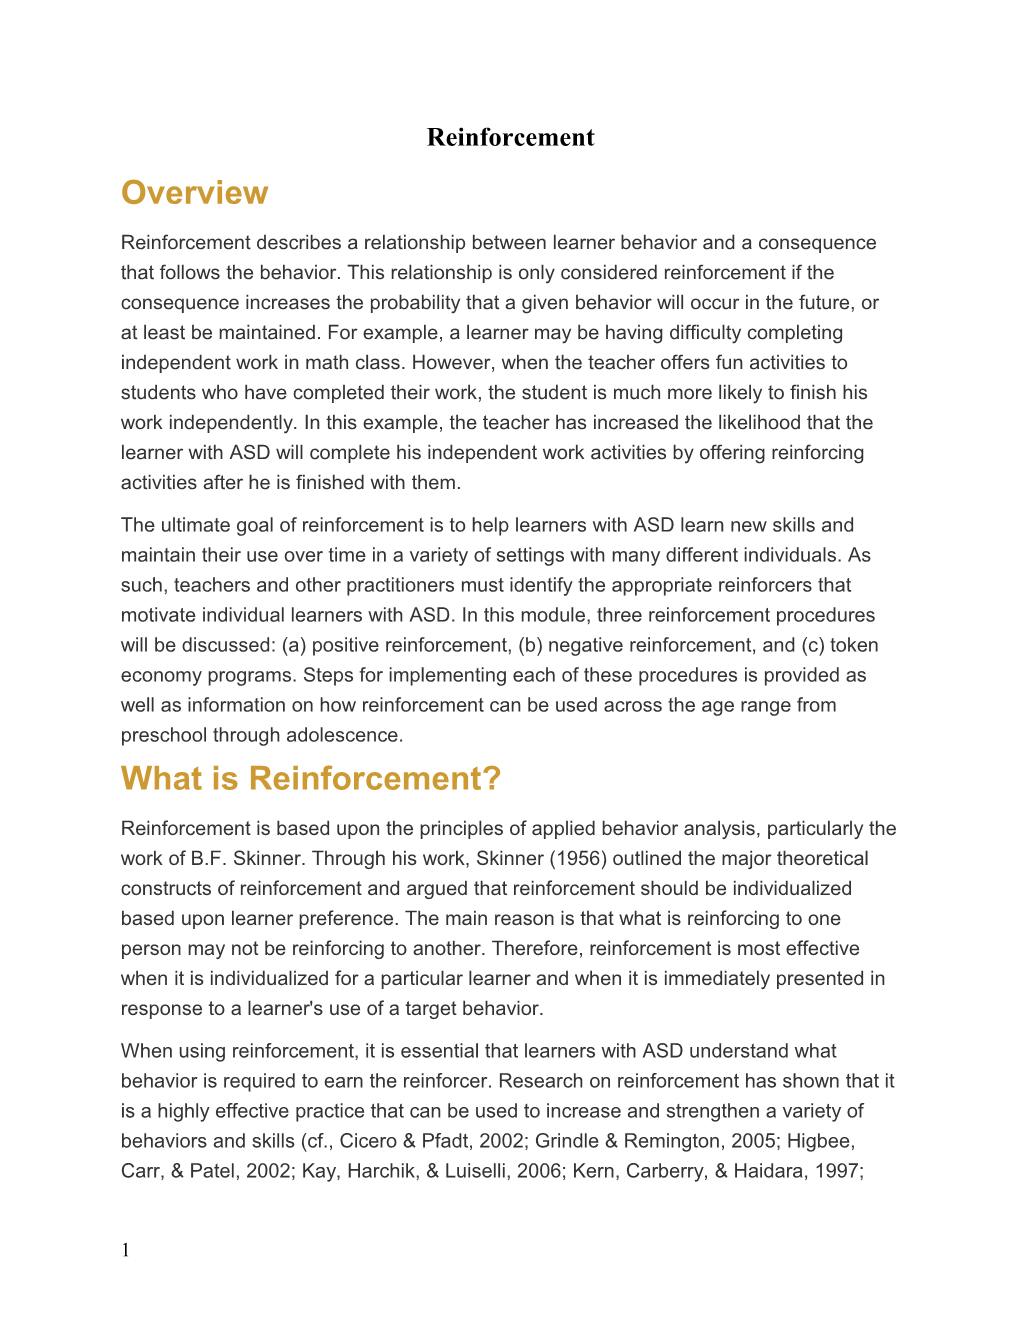 What Is Reinforcement?